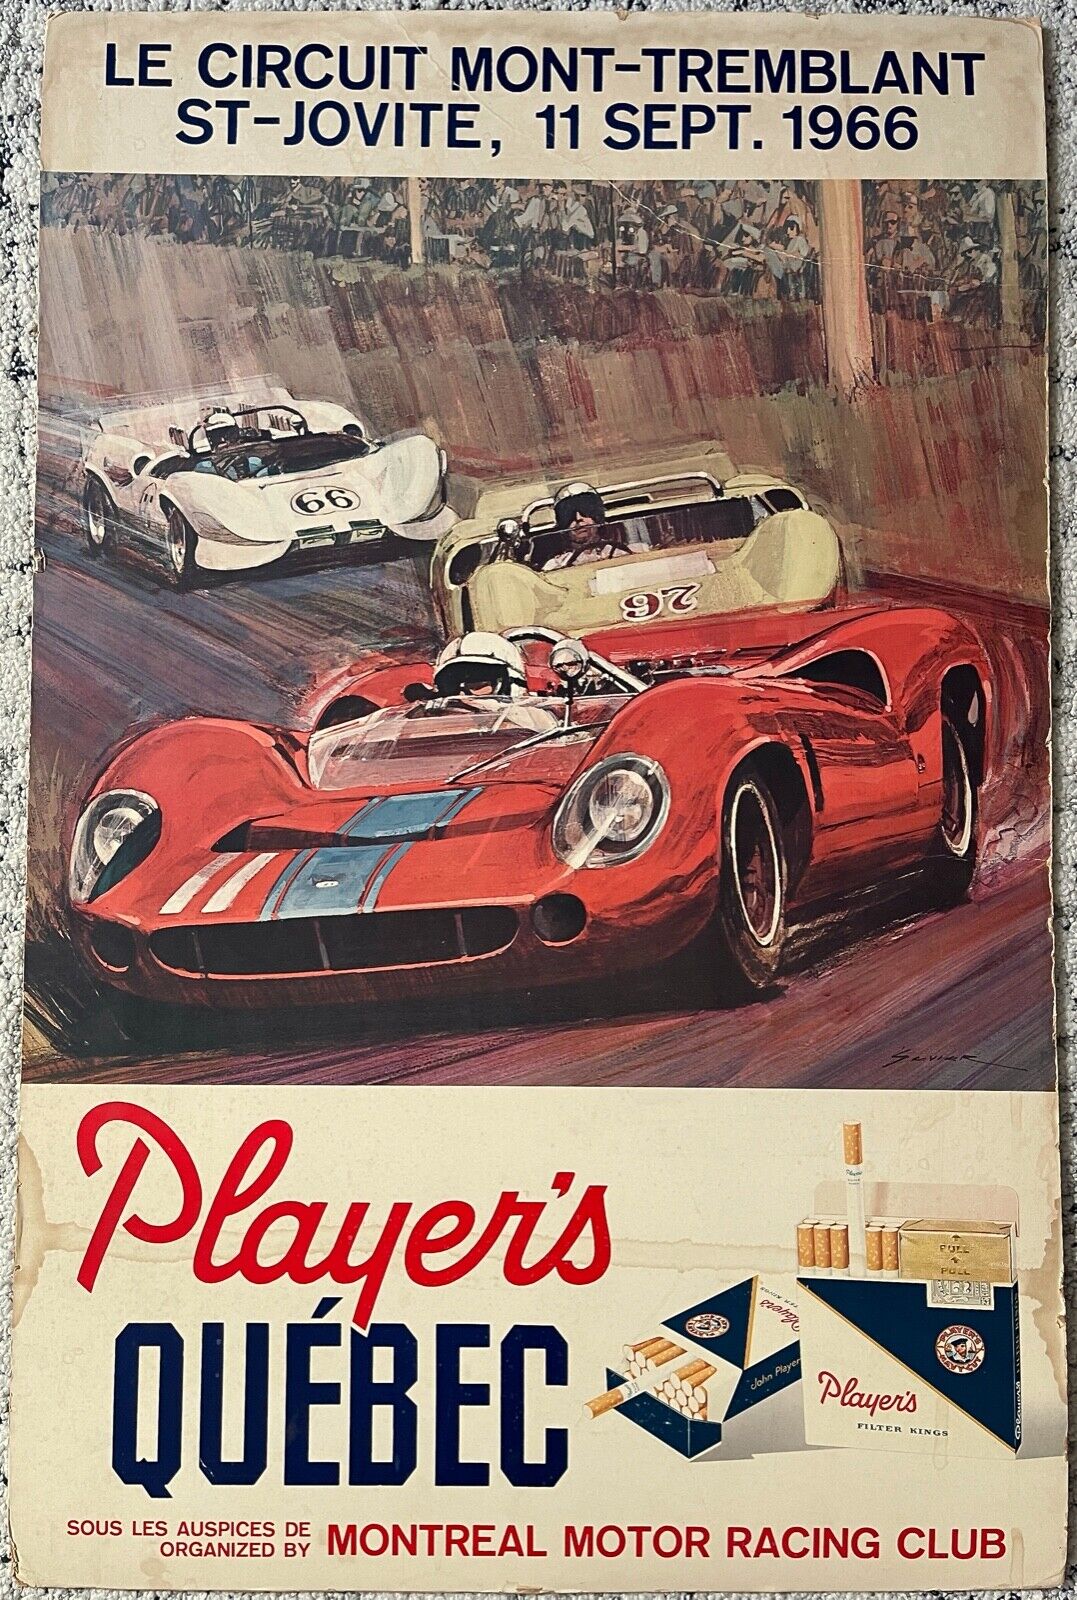 ORIGINAL 1966 CHAPARRAL CAN-AM Motor Car RACING STAND UP SIGN POSTER CIGARETTES